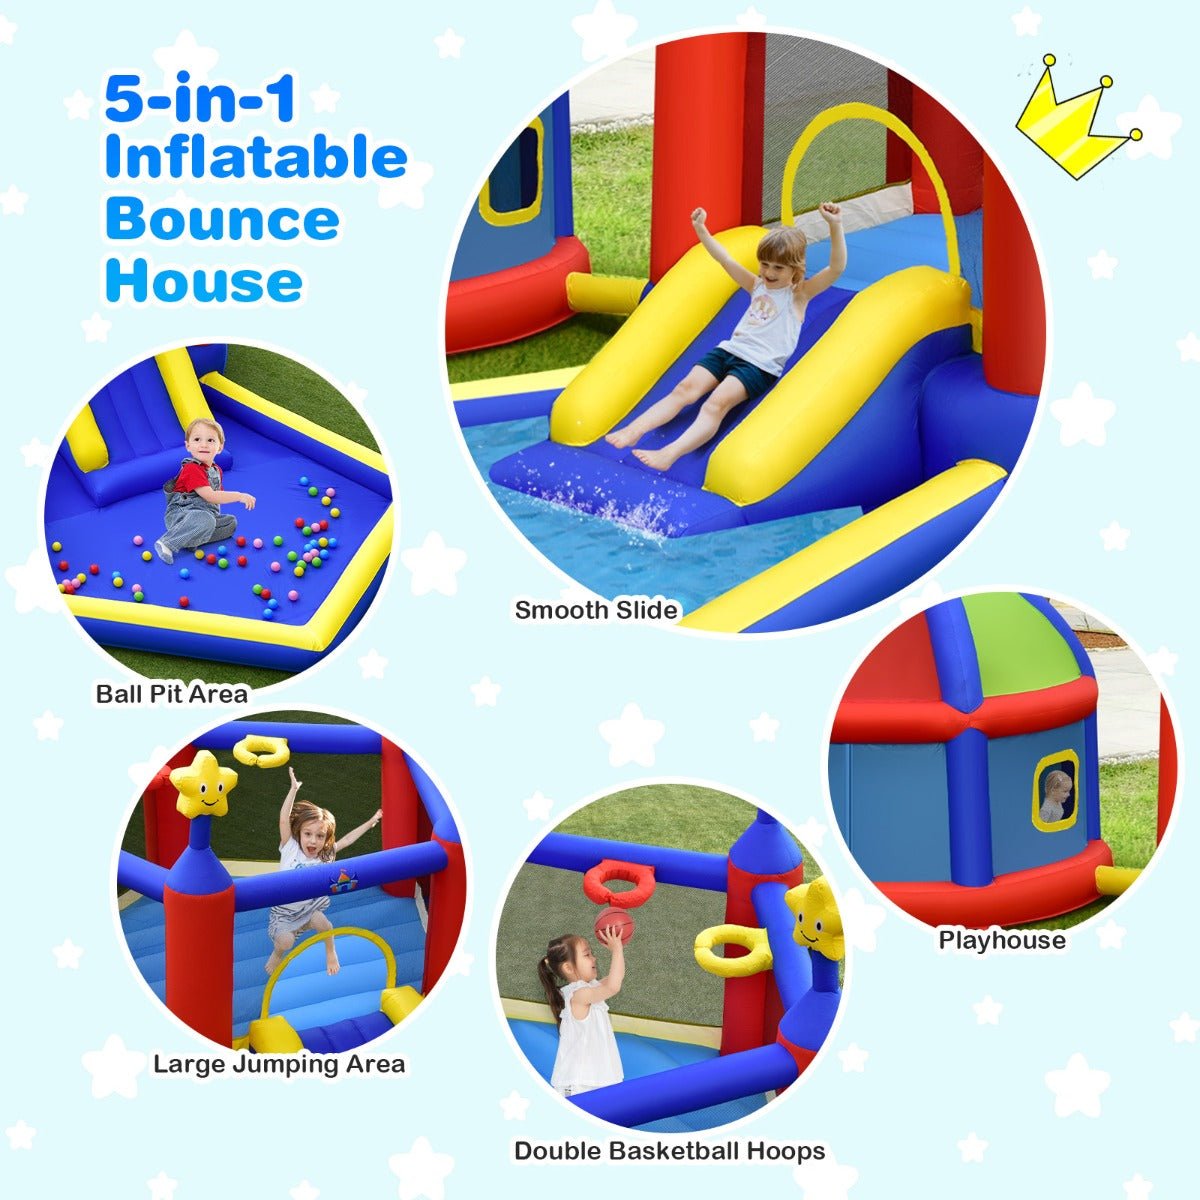 Kids Inflatable Bouncy House - Double the Basketball Action